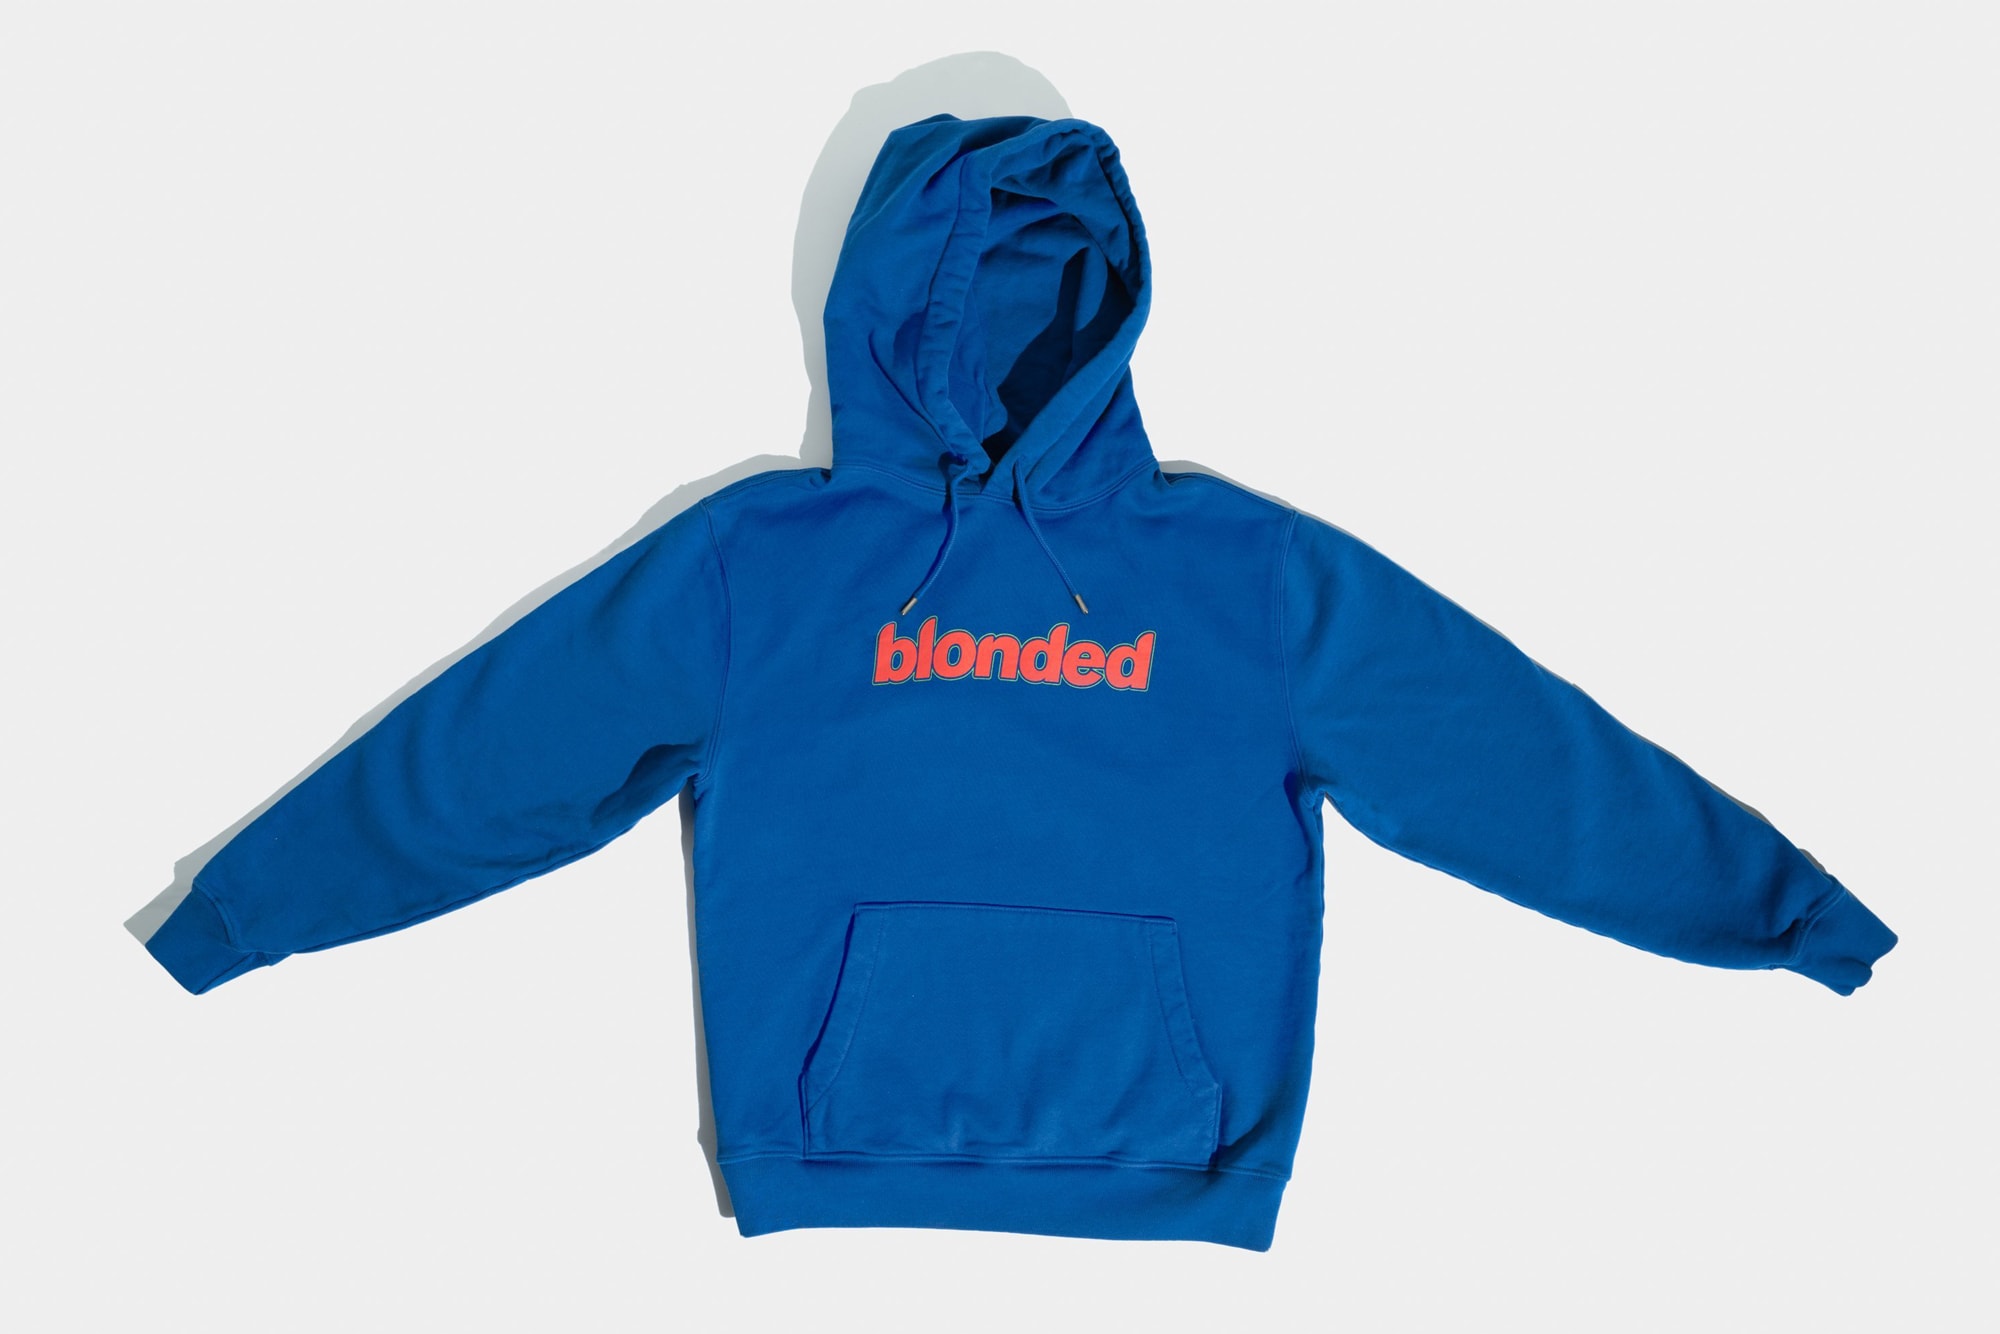 Frank Ocean Blonded Spring 2020 Apparel Collection Merch Tour Merch In My Room Endless Blond Blonde DHL Prep+